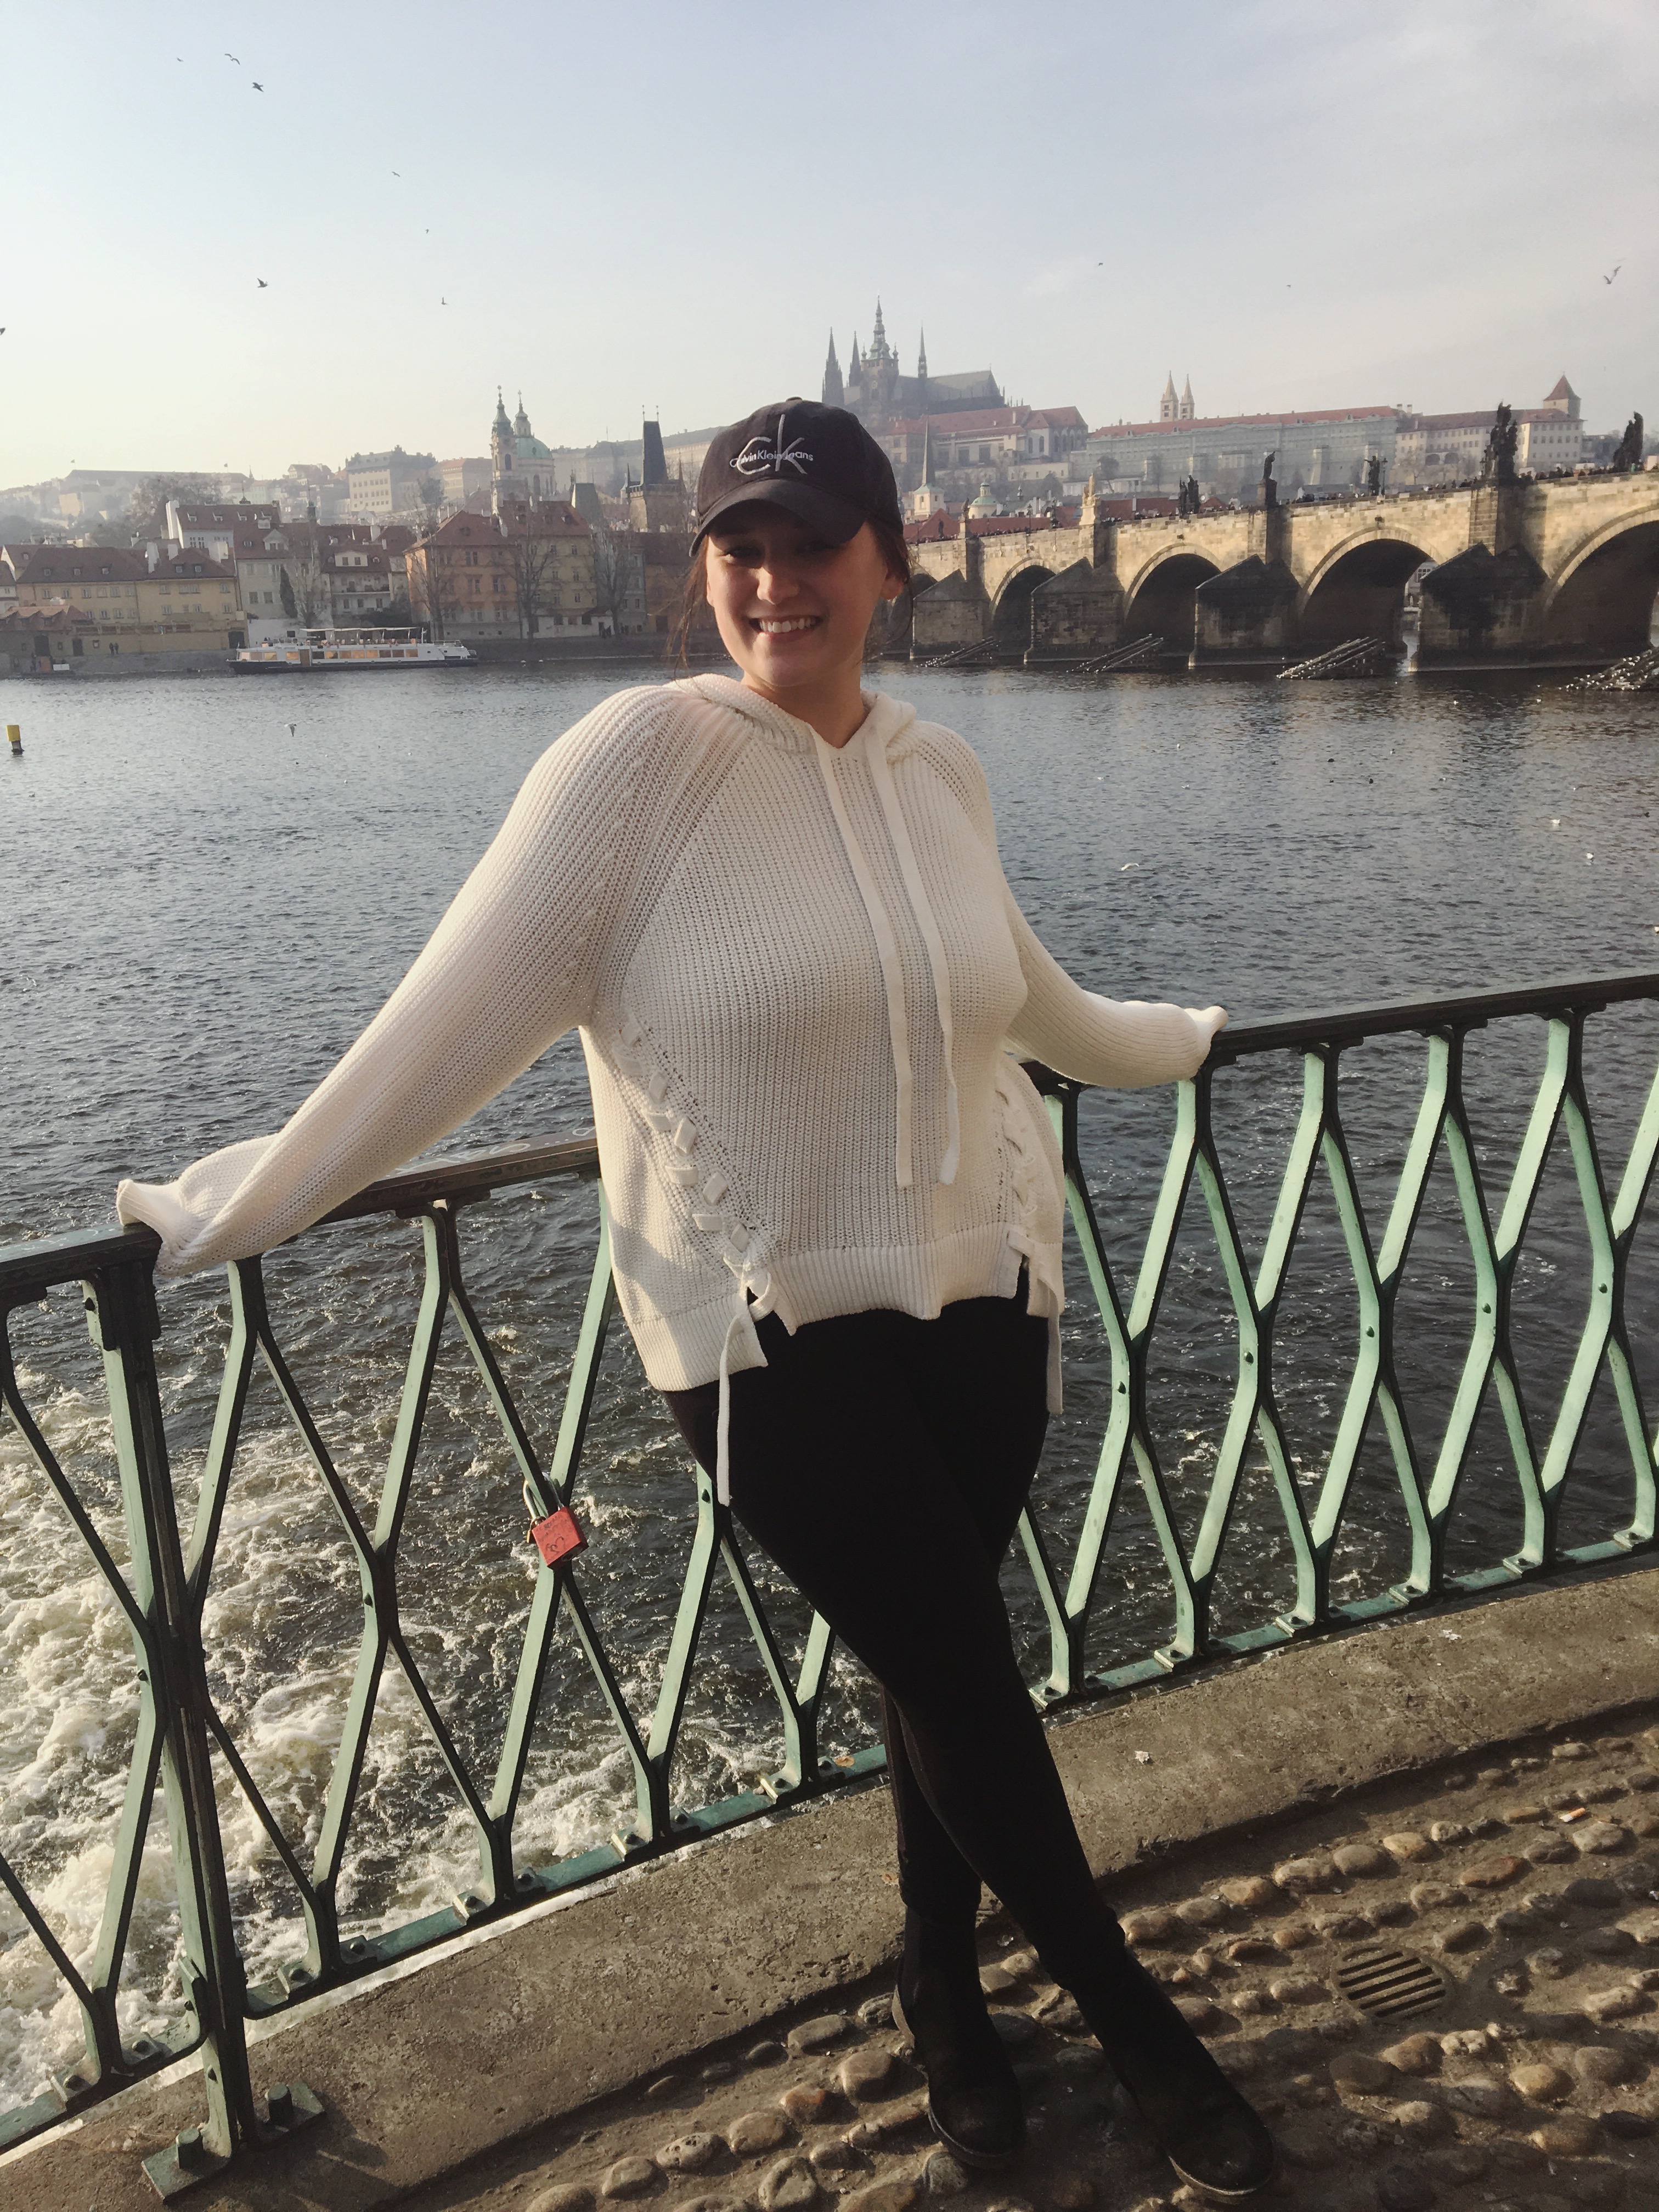 UofL senior Kelly Vetter spent the summer studying in Prague where she took about 75 short video clips that won her an award.